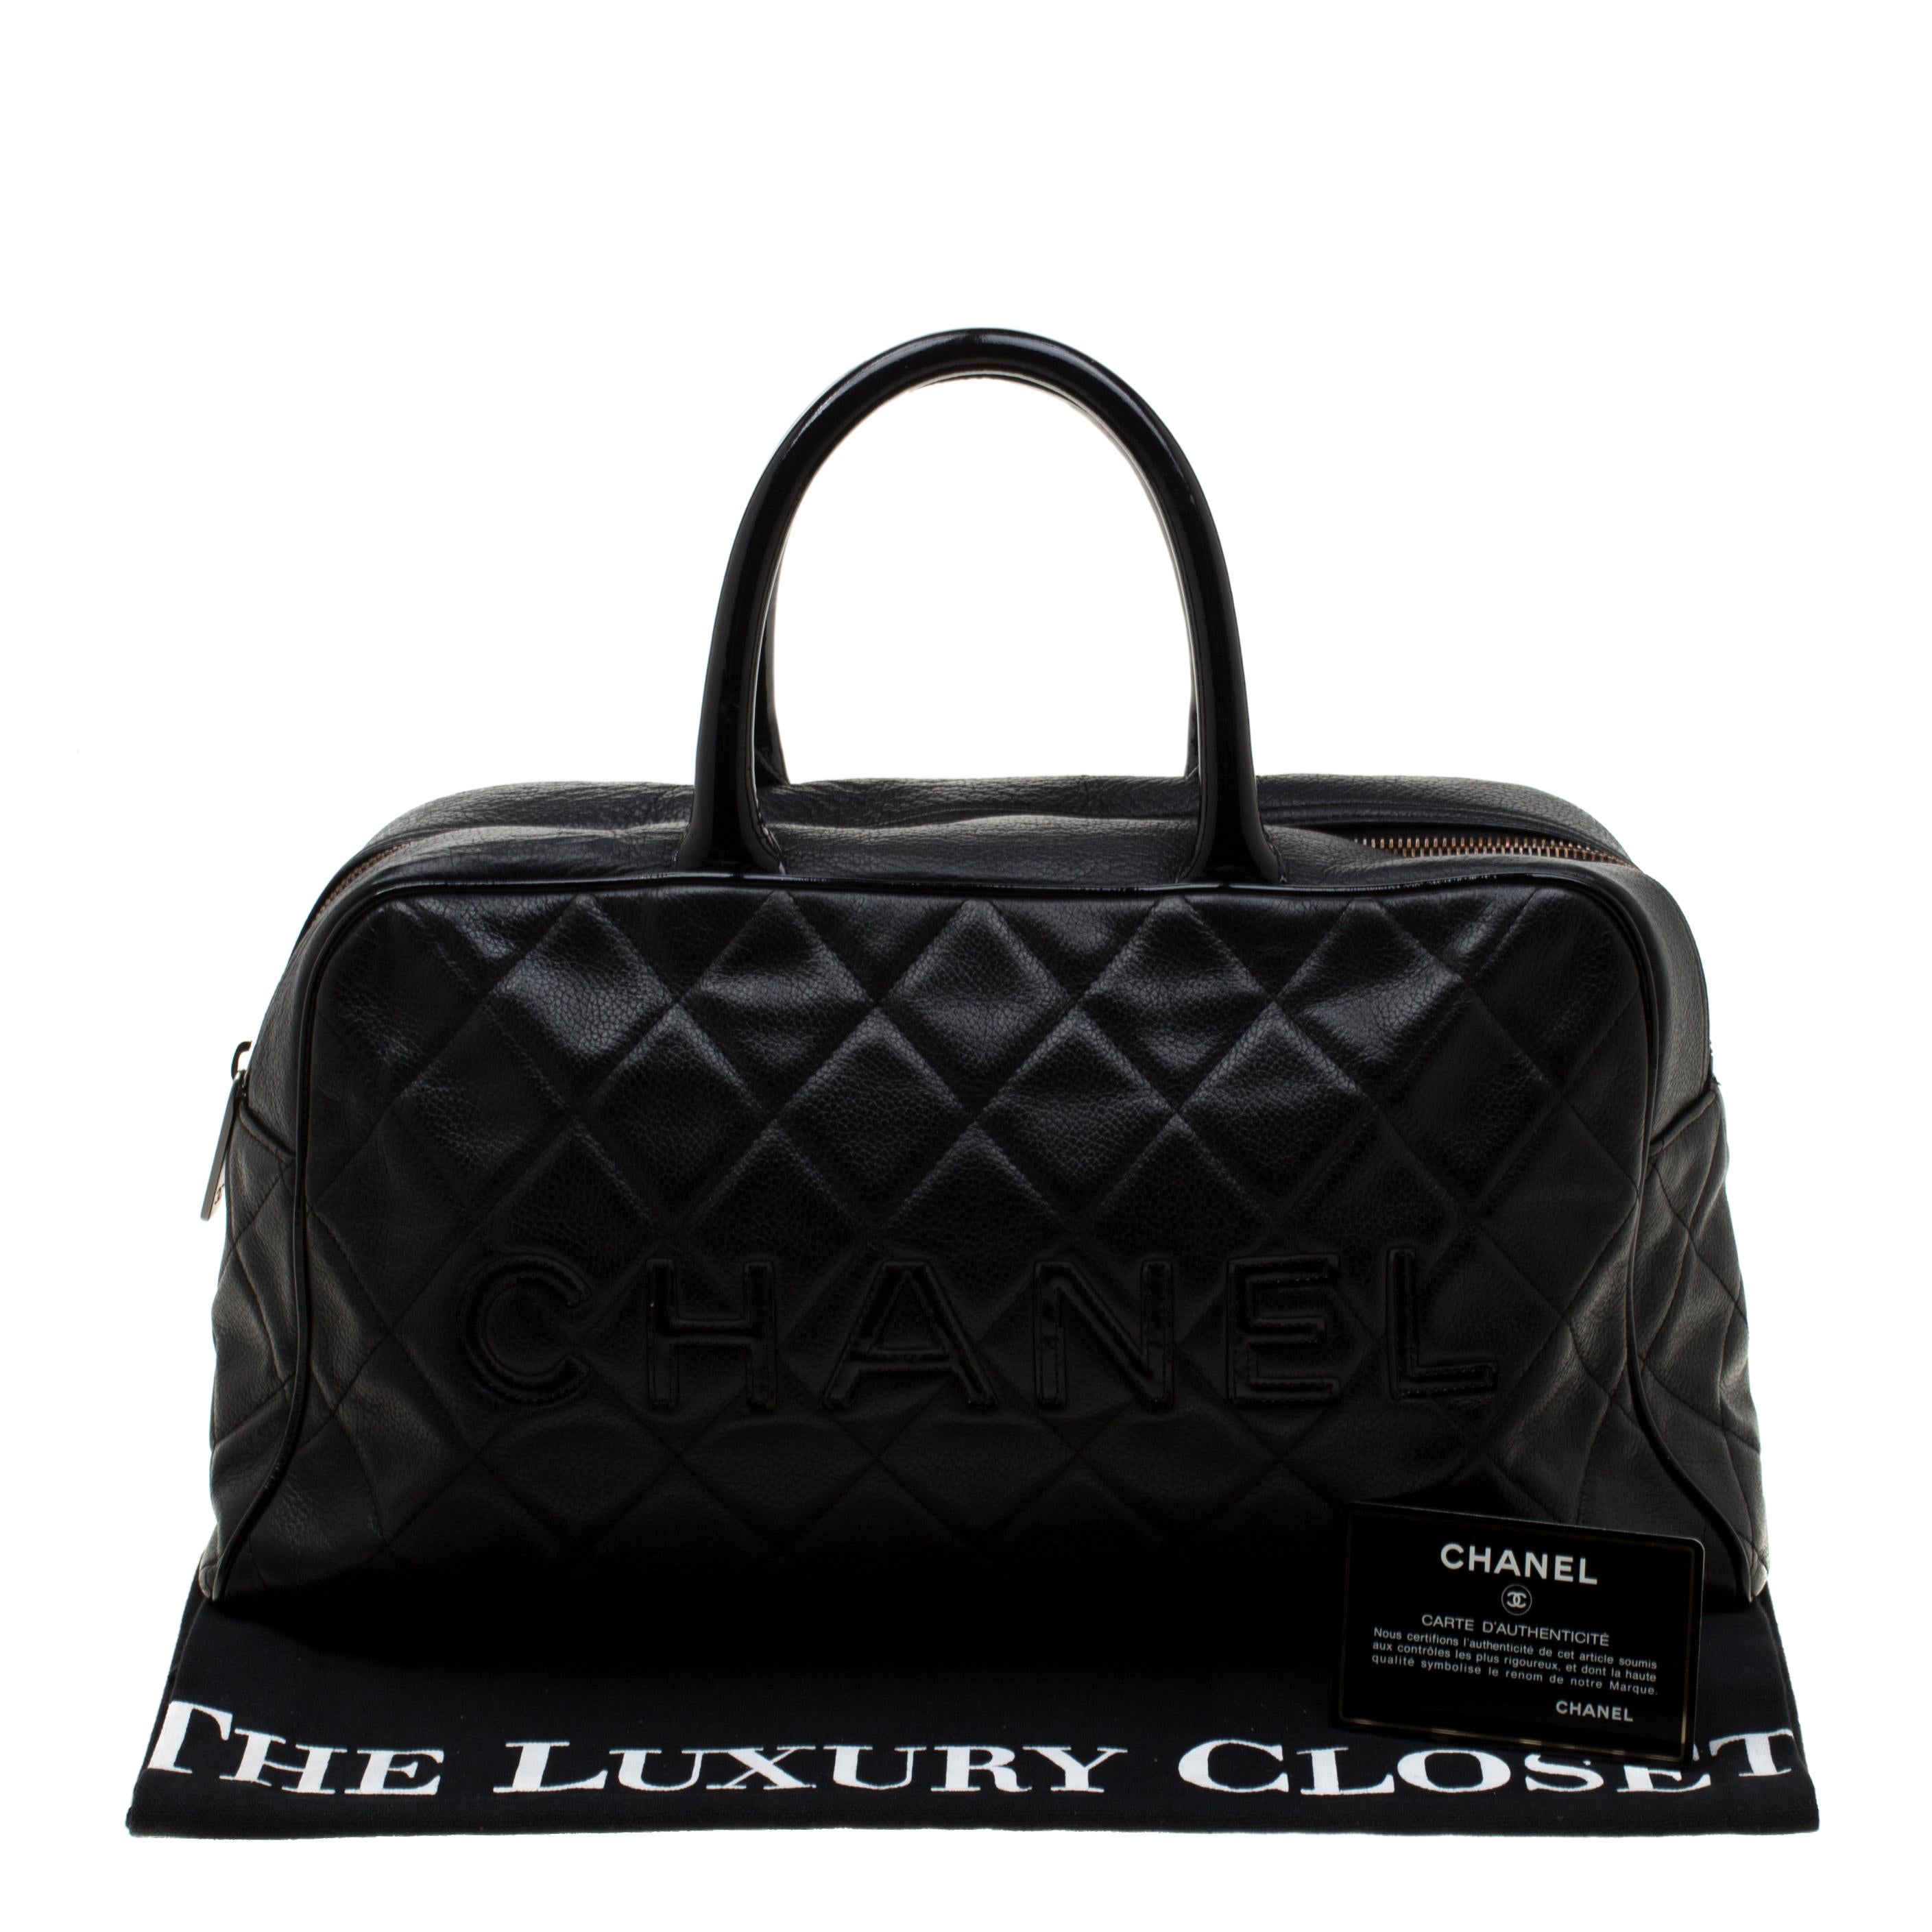 Chanel Black Quilted Leather Enamel Boston Bag 8